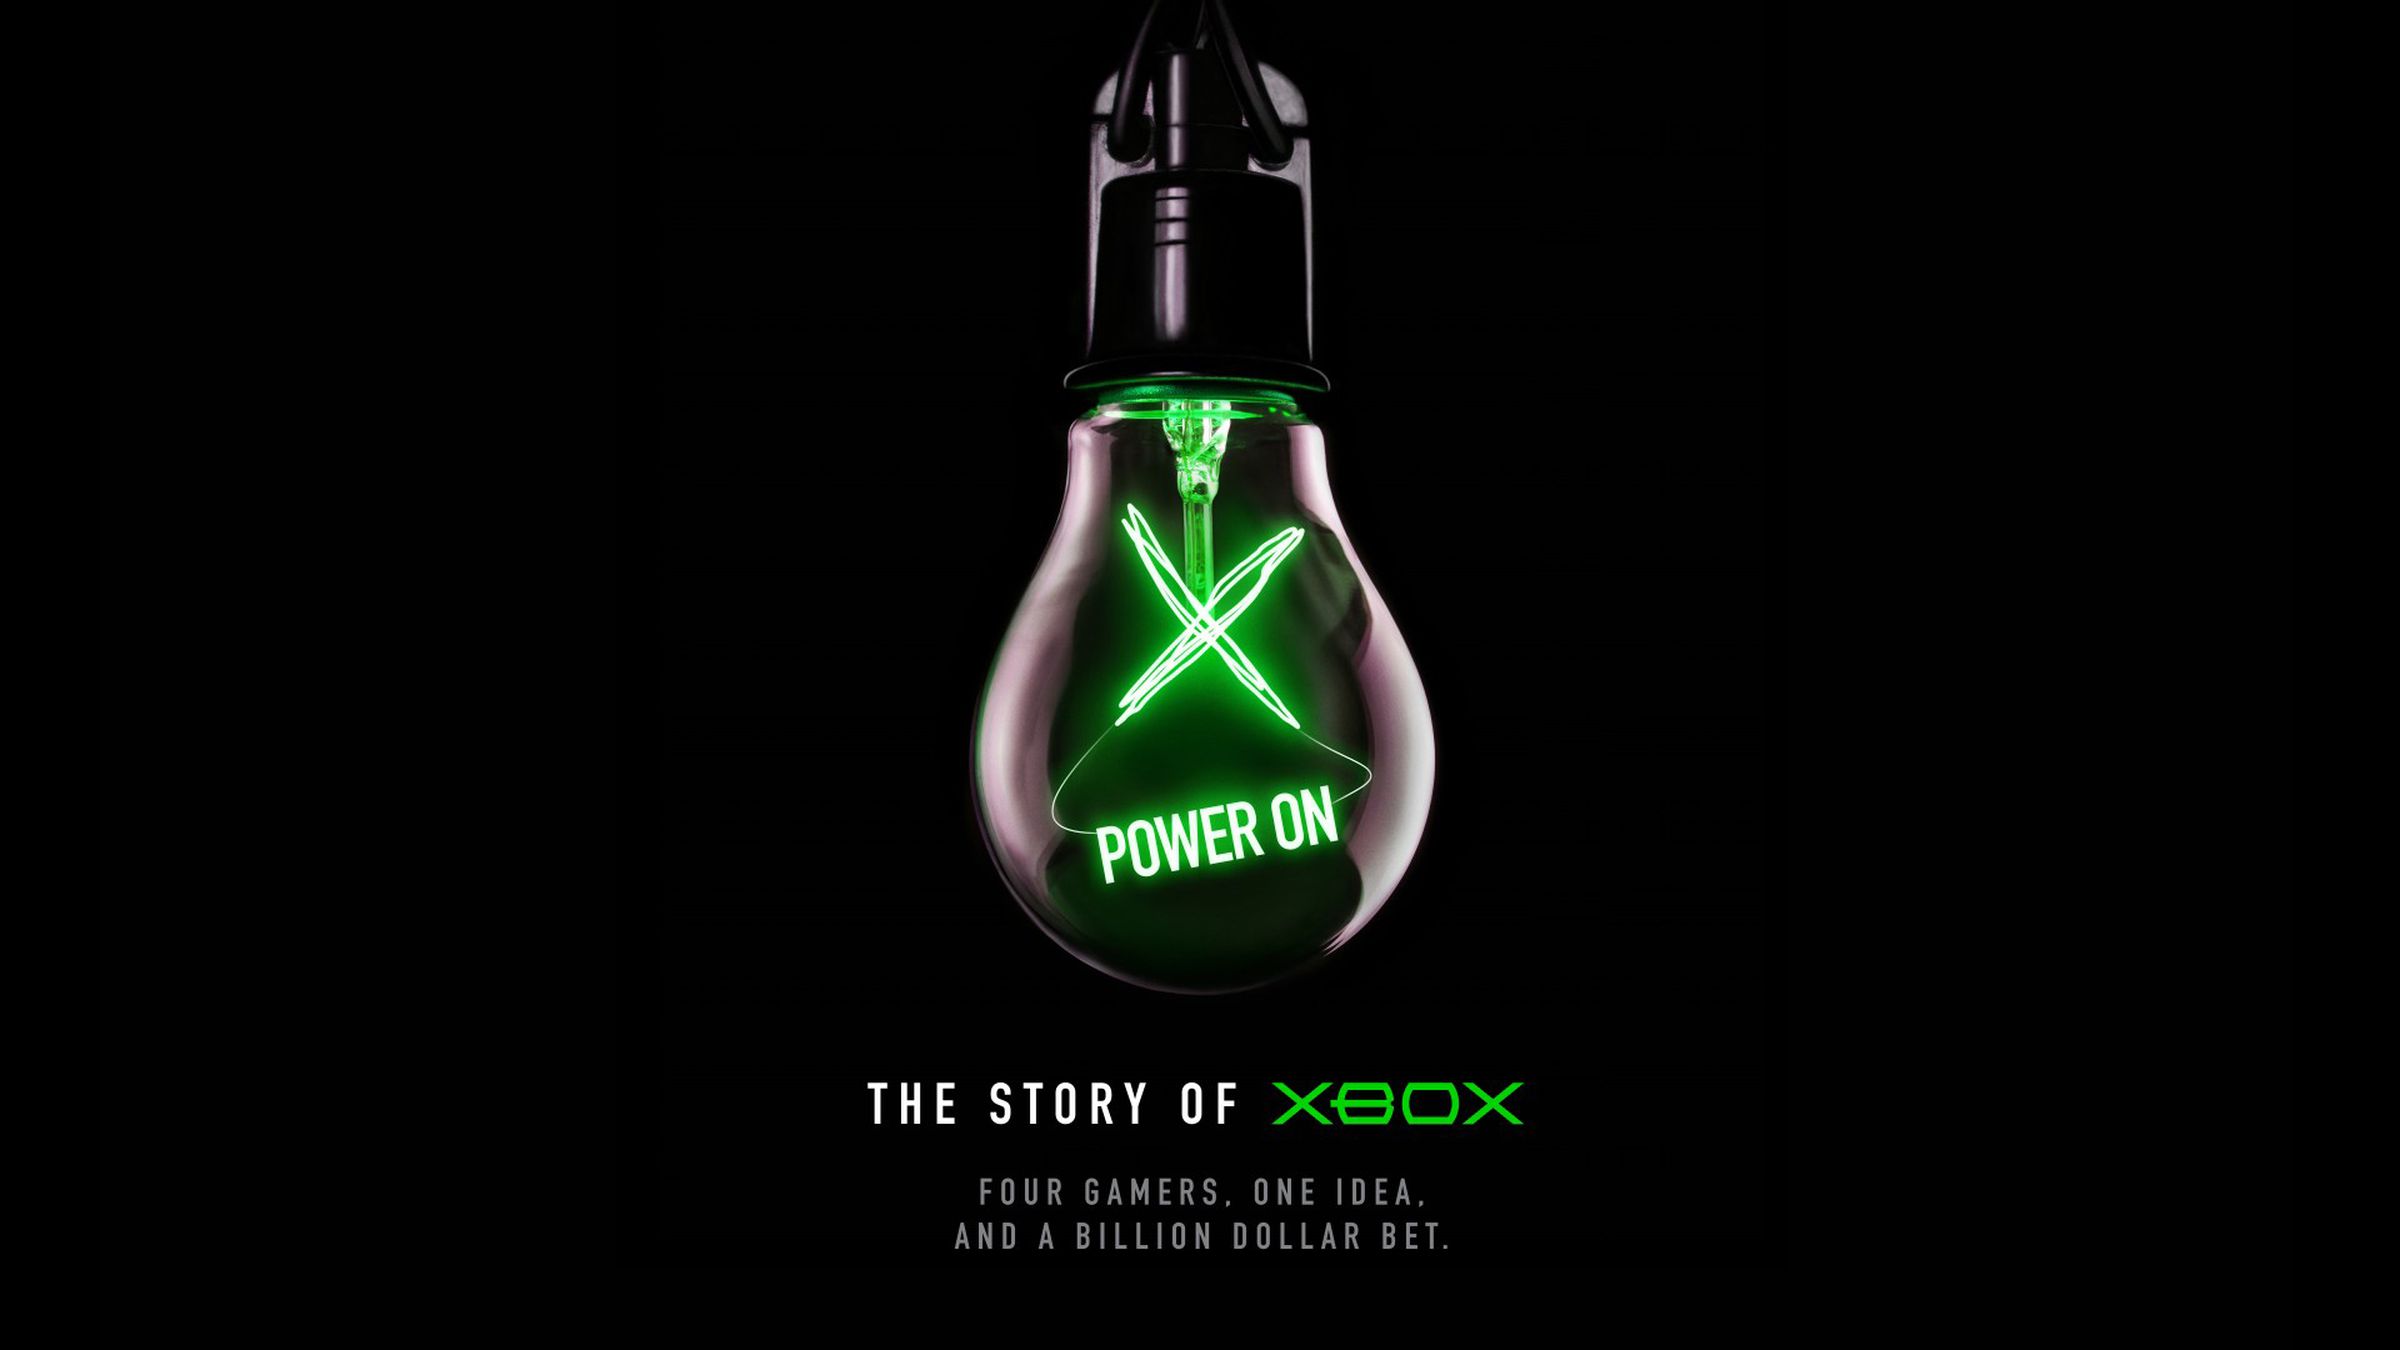 Power On documents the 20-year history of Xbox.